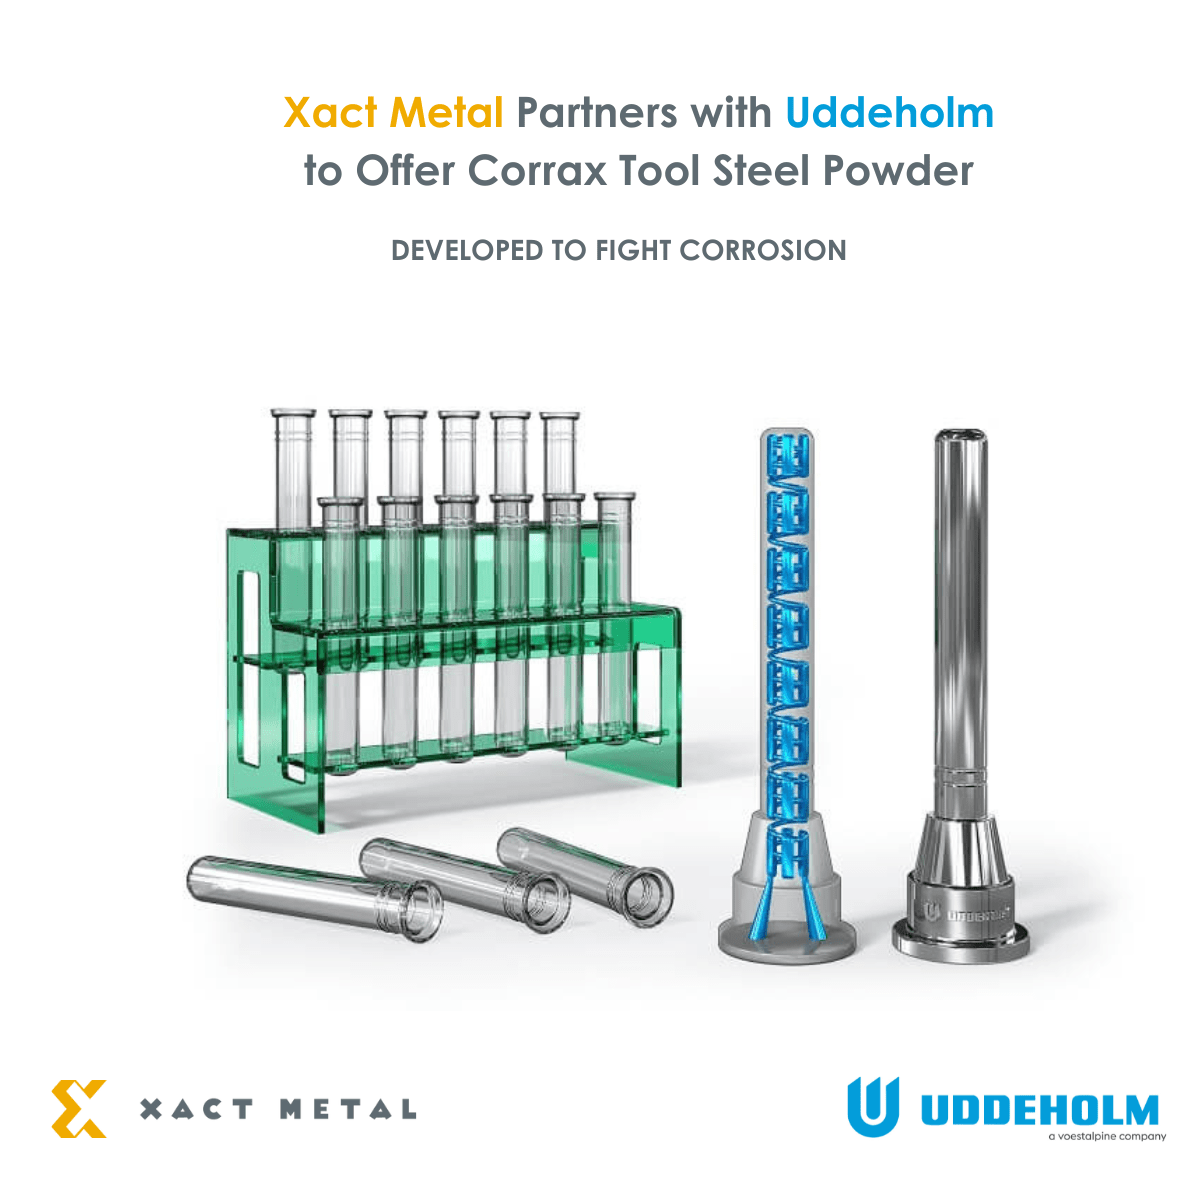 XACT METAL ANNOUNCES PARTNERSHIP WITH UDDEHOLM TO OFFER CORRAX TOOL STEEL POWDER